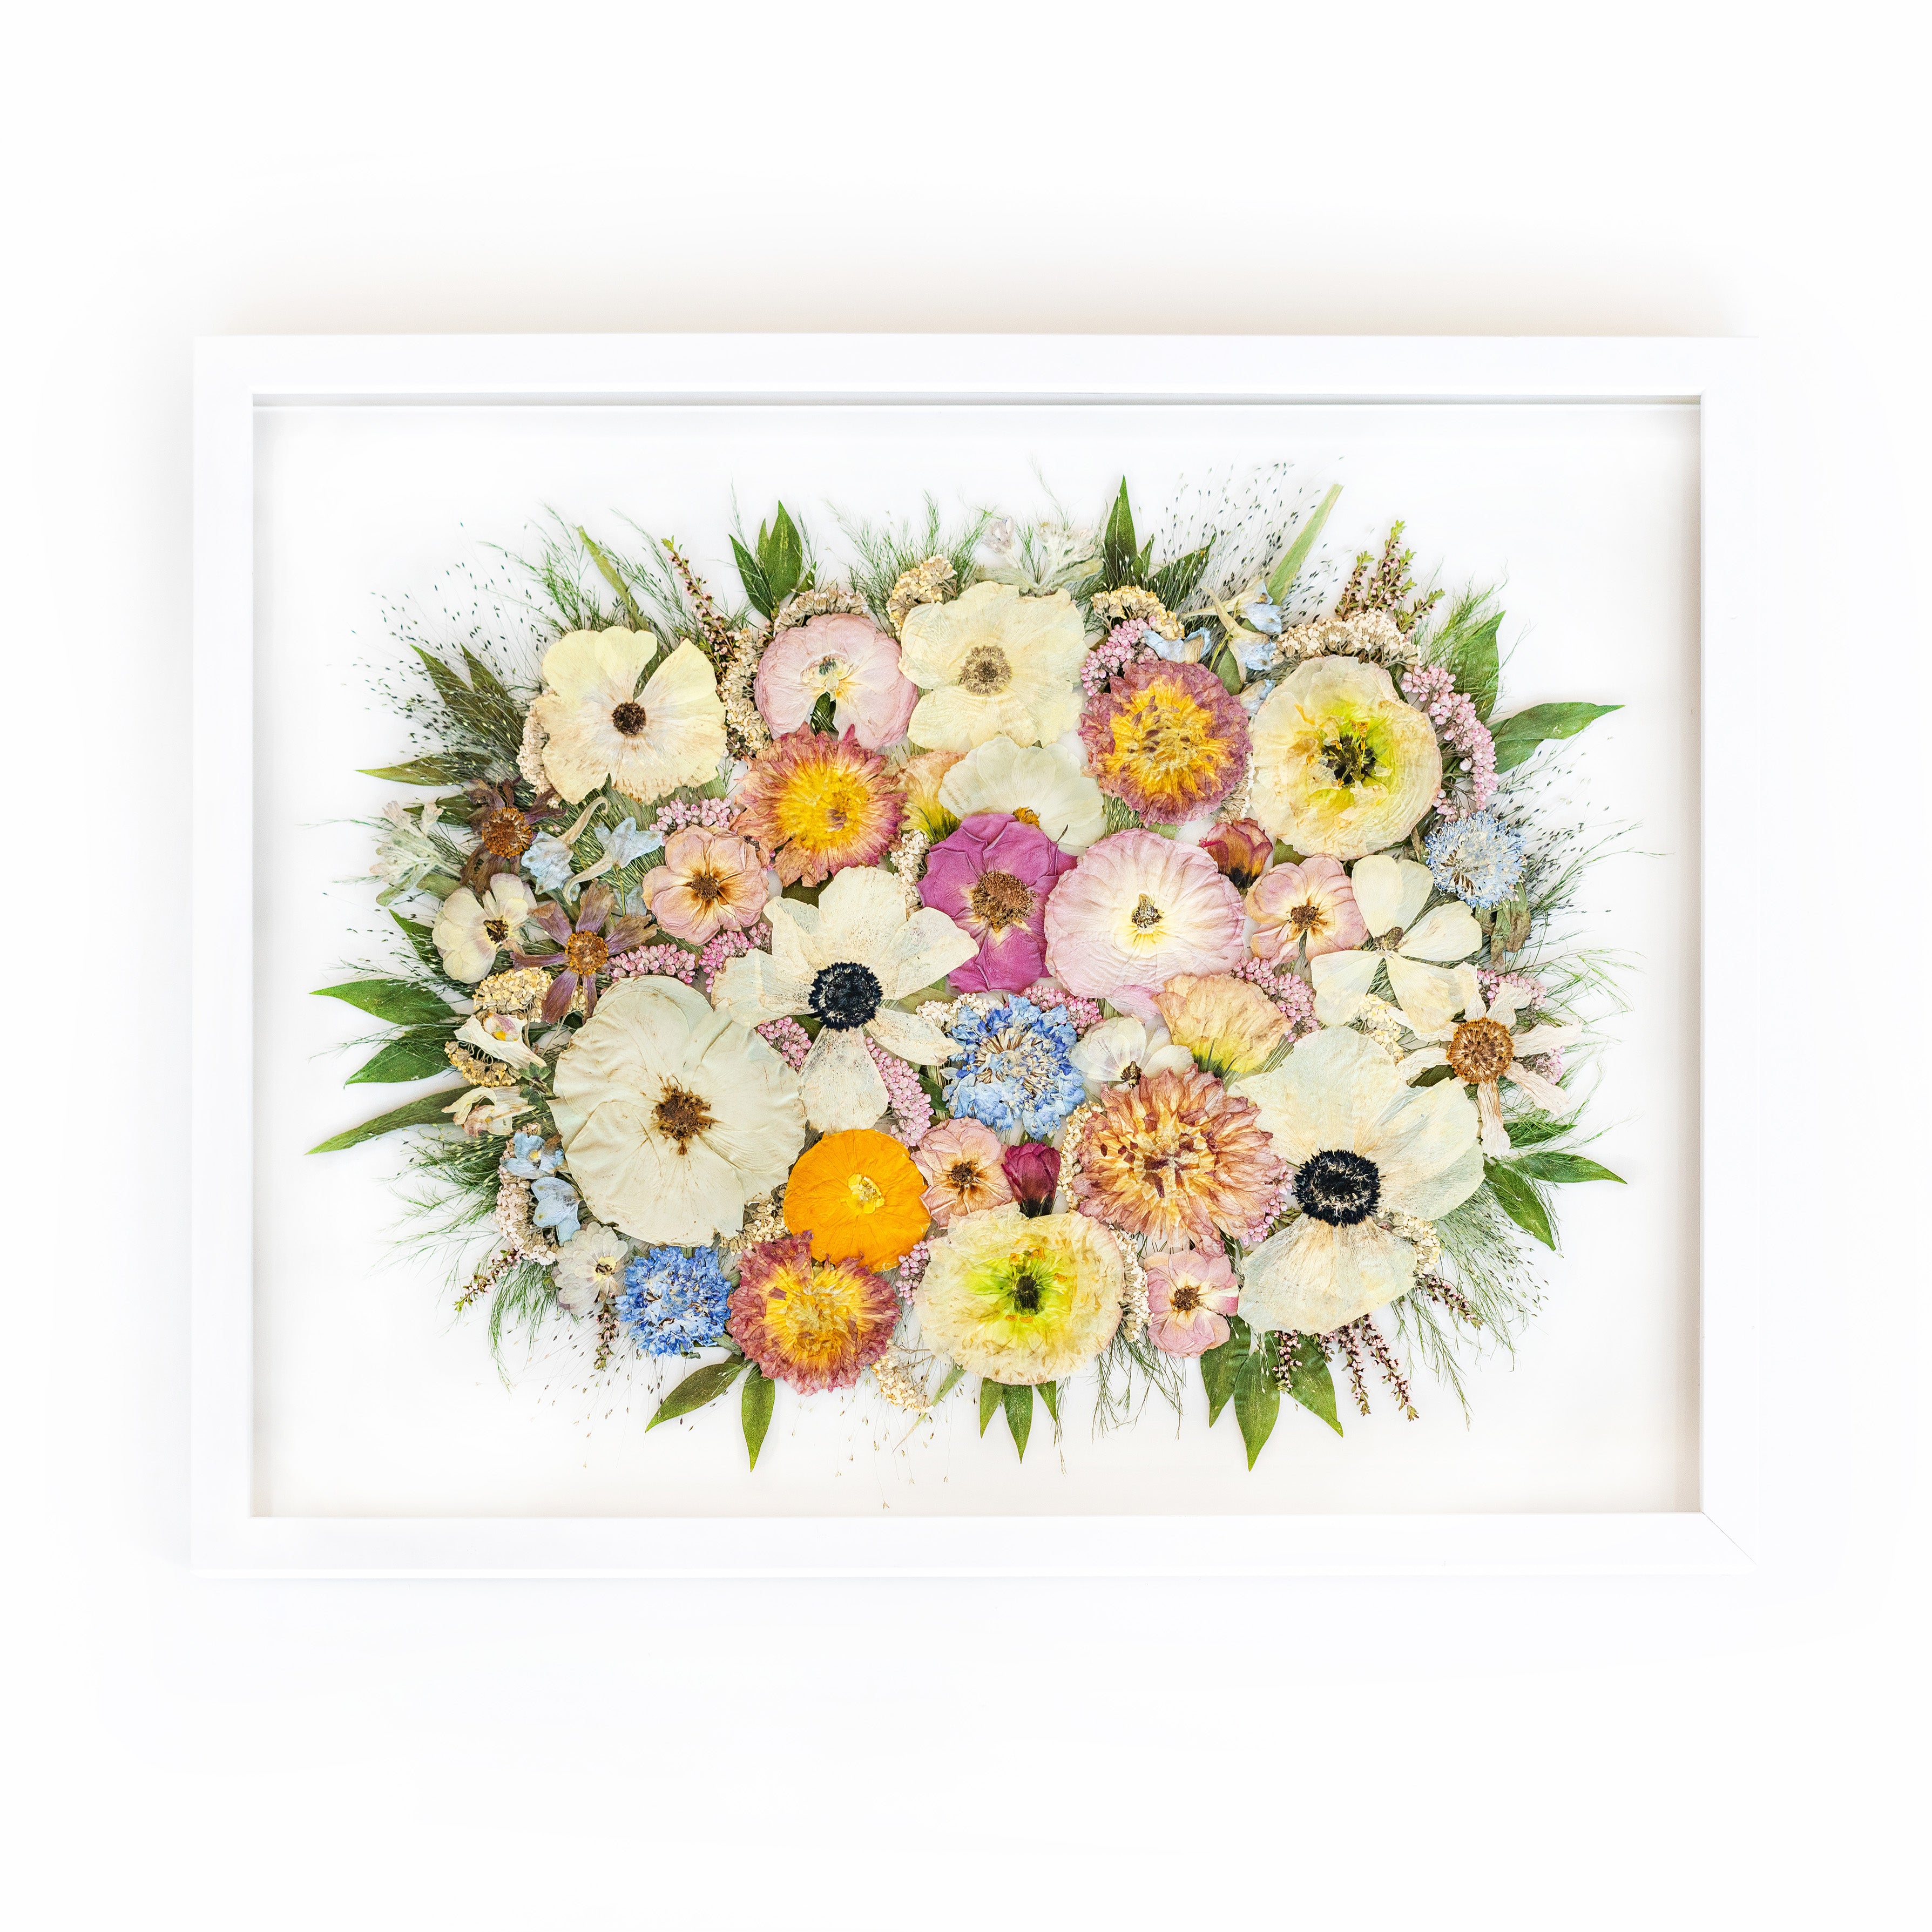 Already dried bouquet – Pressed Floral